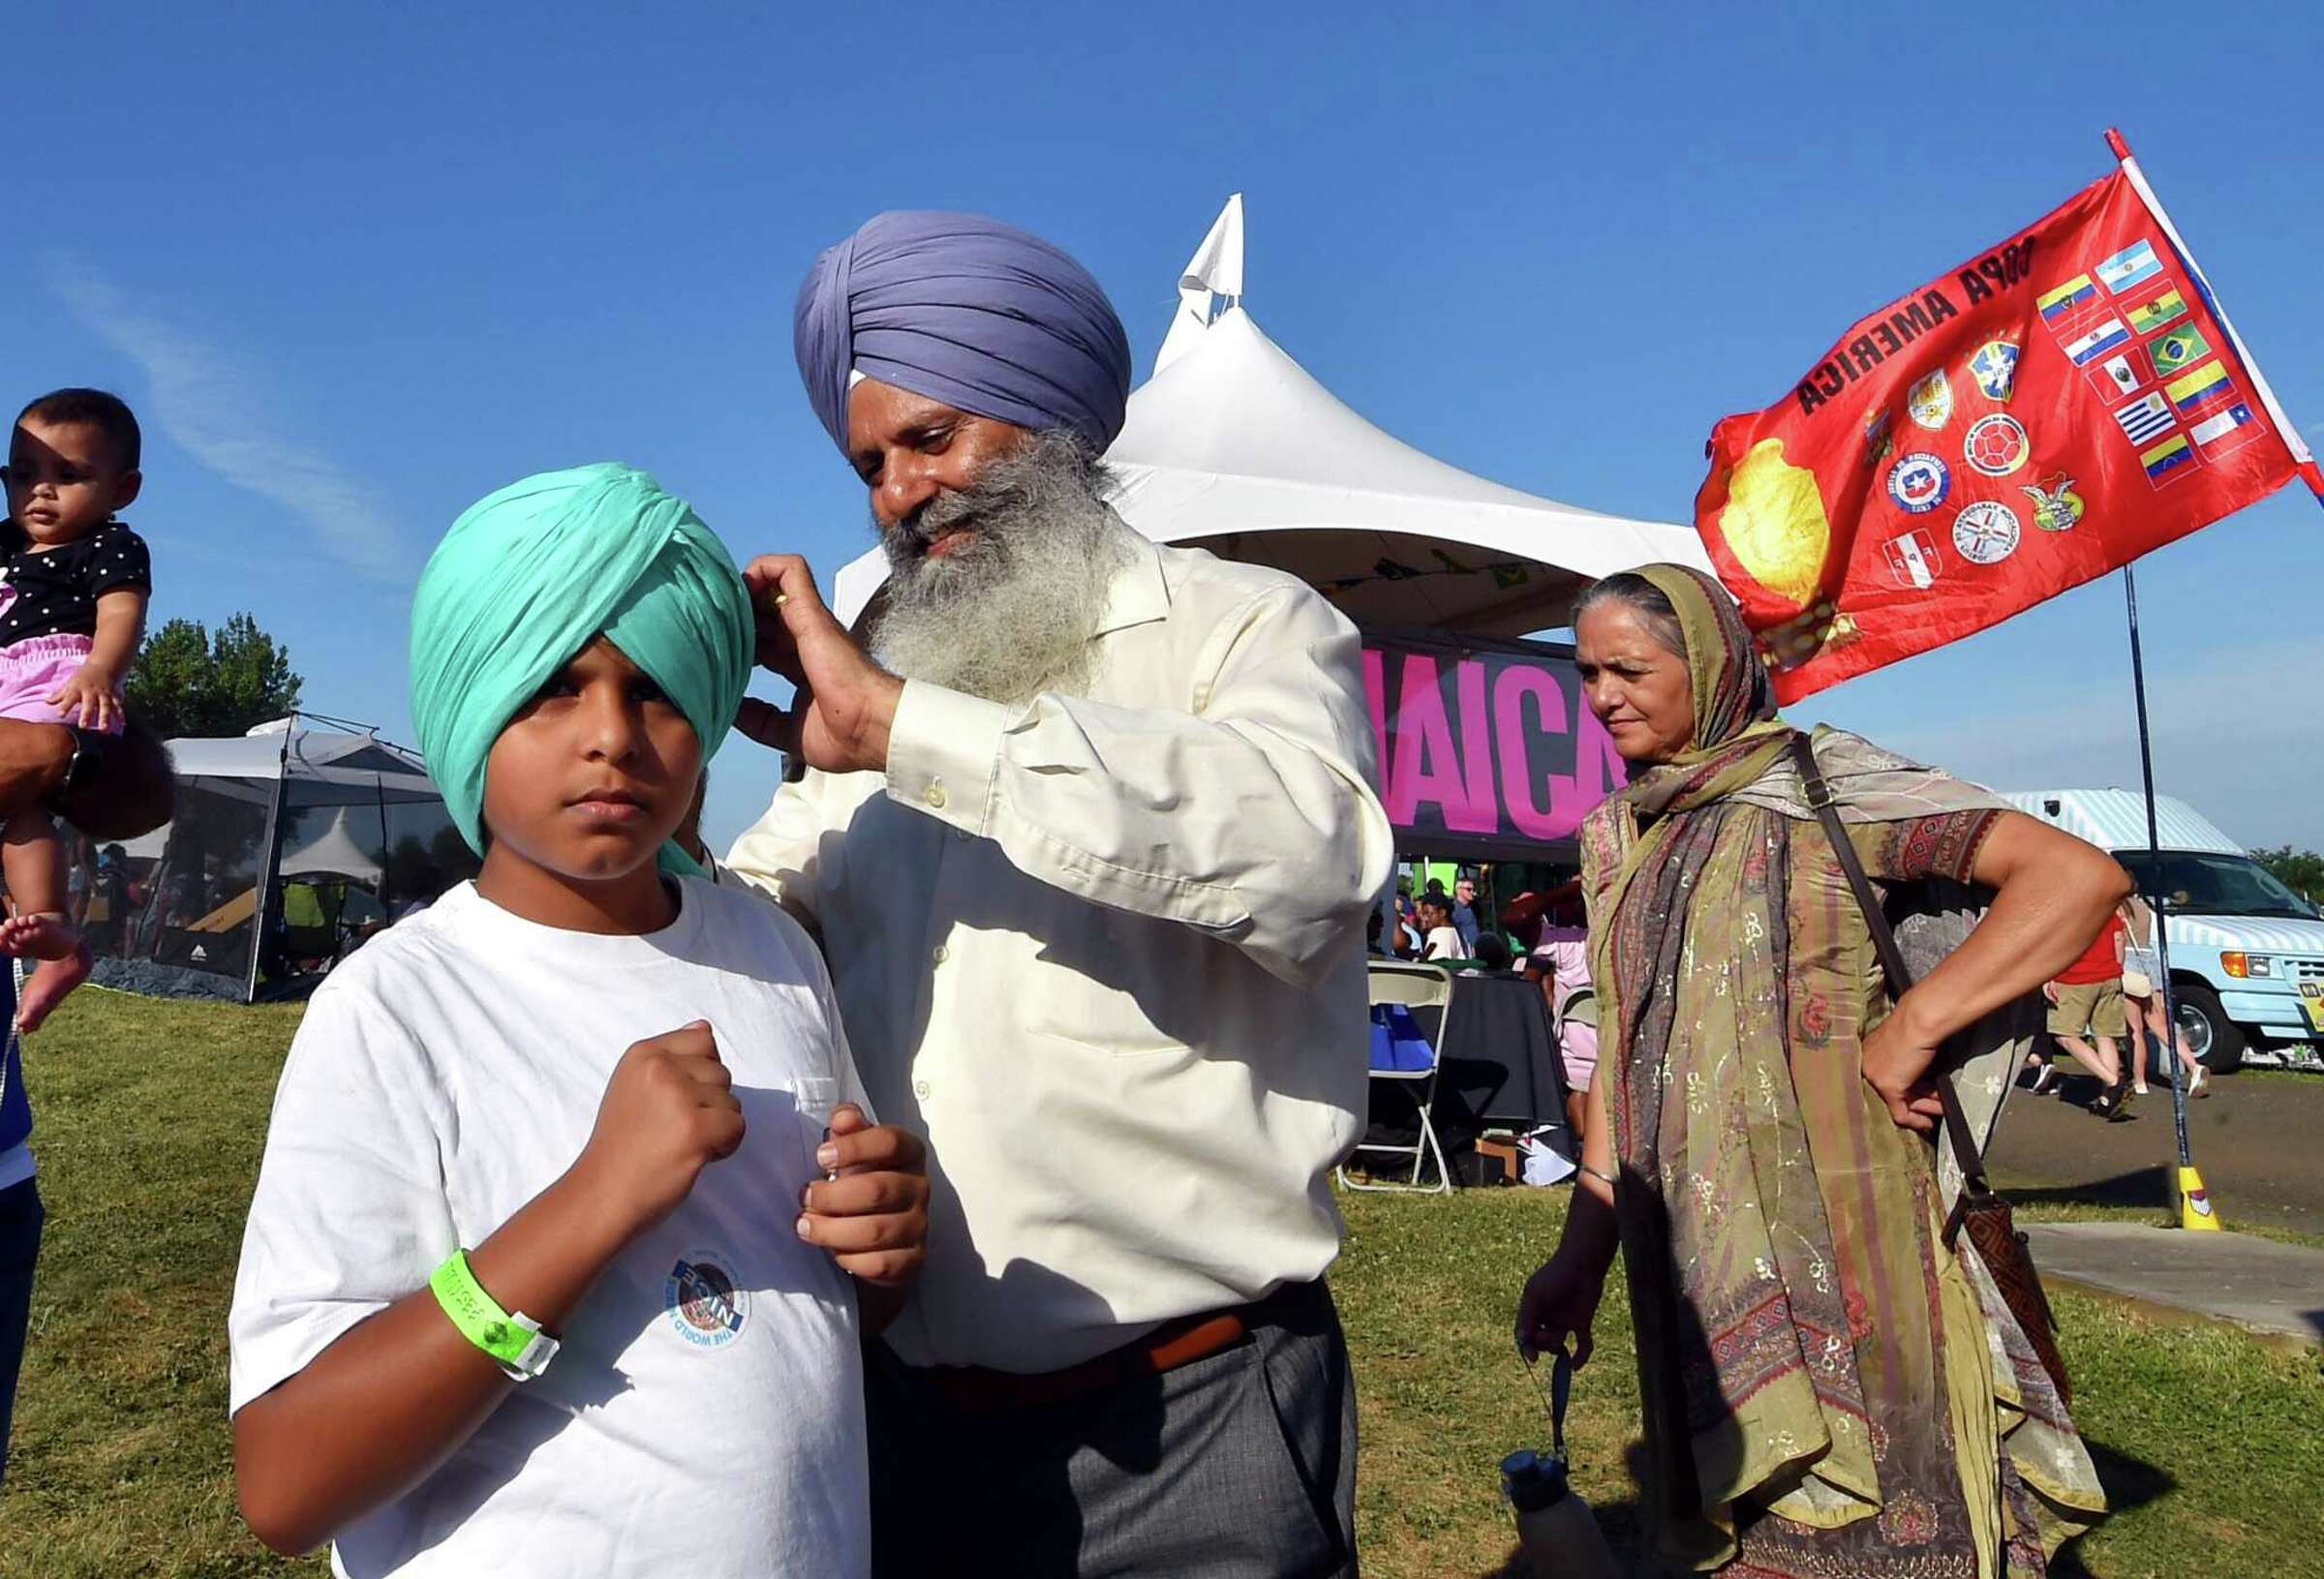 In Photos: NICE Festival in Norwalk celebrates different world cultures